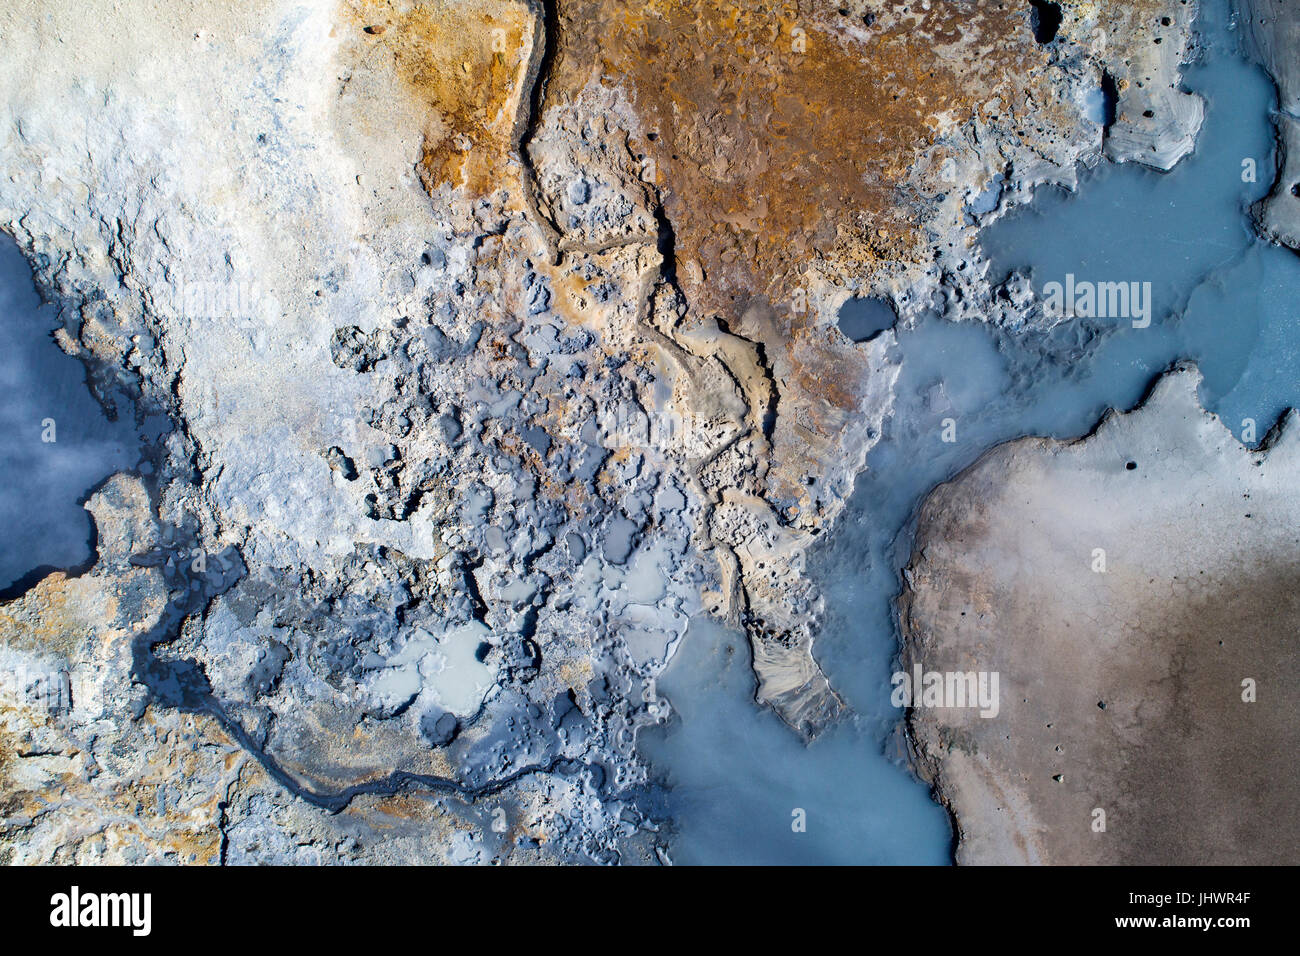 Aerial image of a geothermal area in Iceland with amazing colors Stock Photo